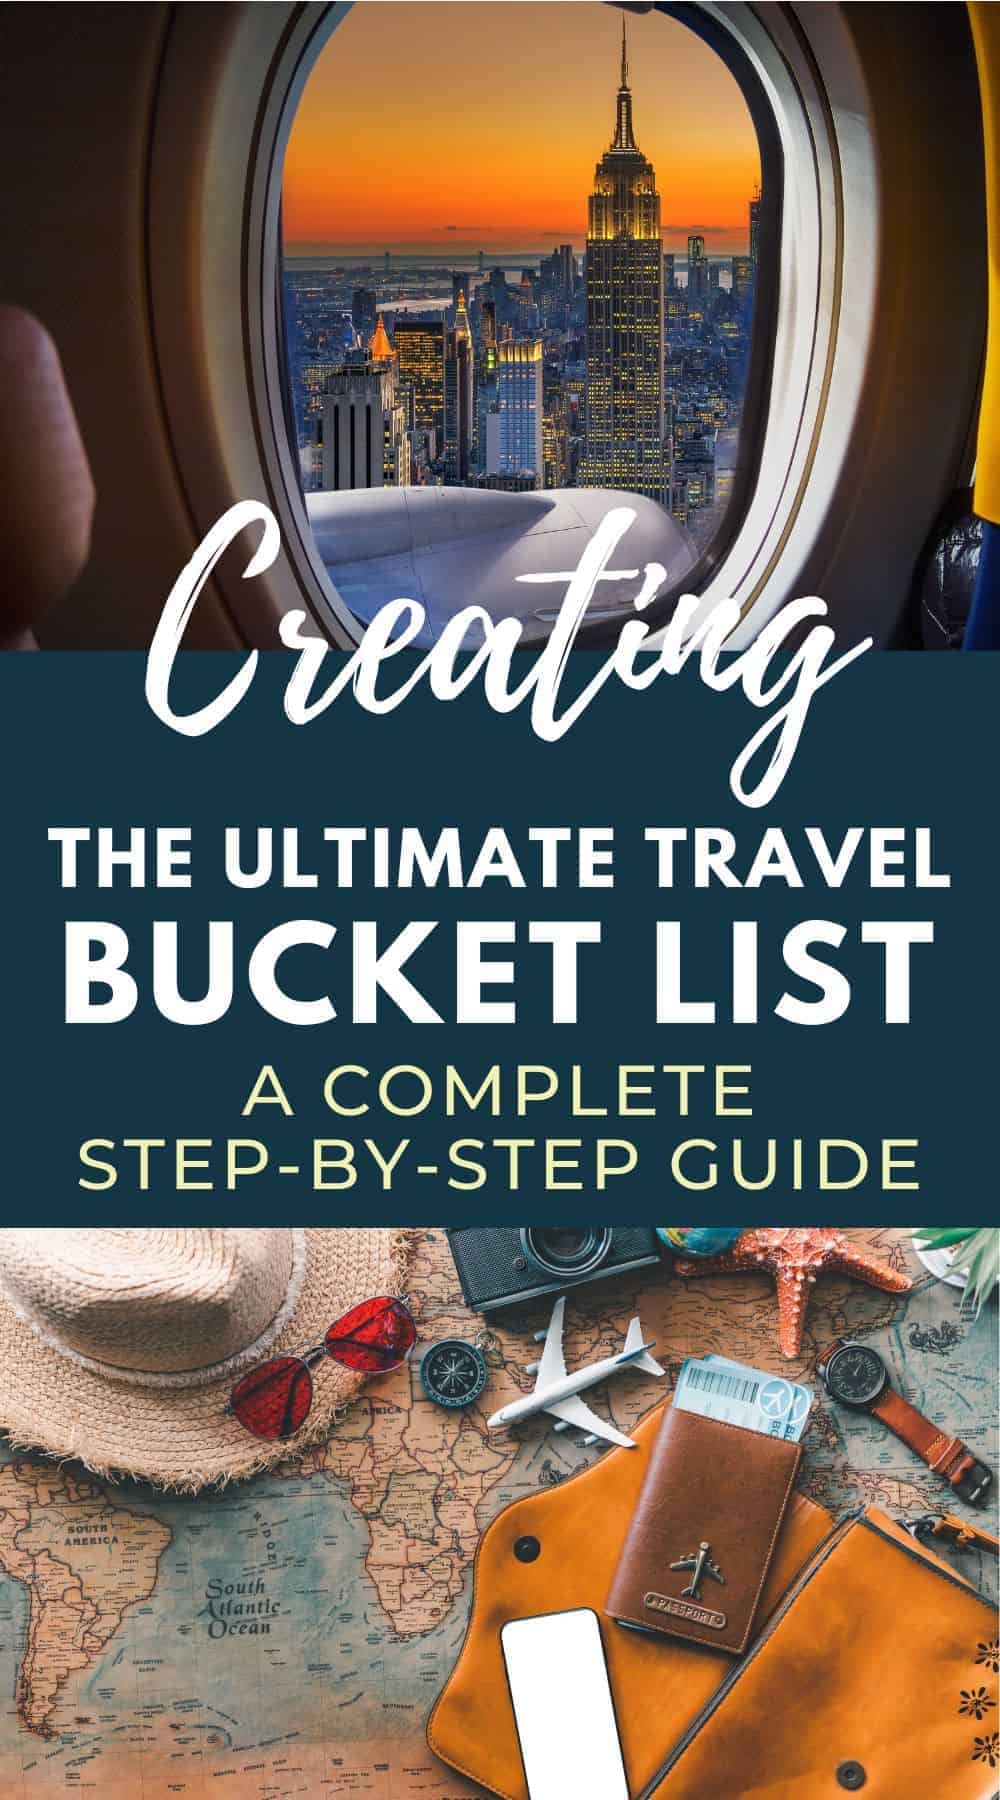 Pinterest image with travel themed photos. The text overlay says "creating the ultimate travel bucket list, a complete step-by-step guide."